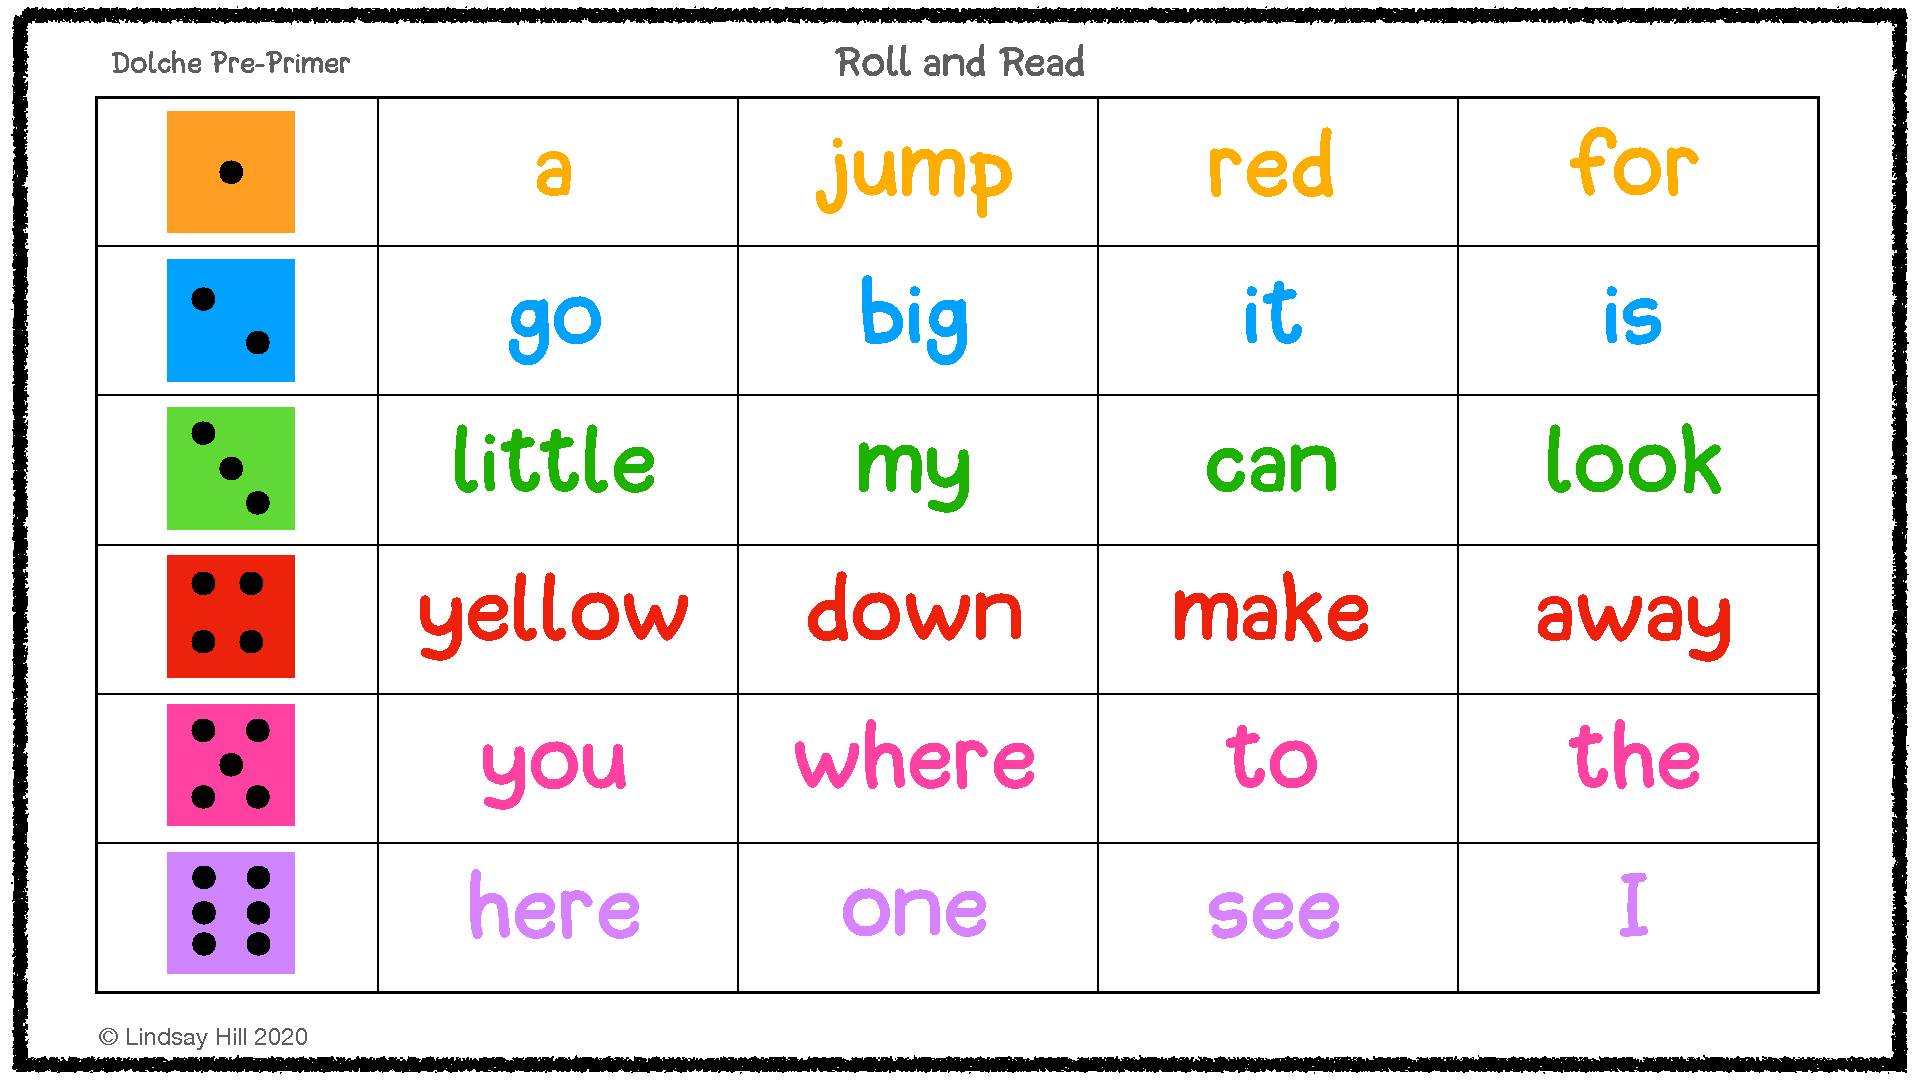 Roll and Read Dolche Pre Primer Sight Words's featured image